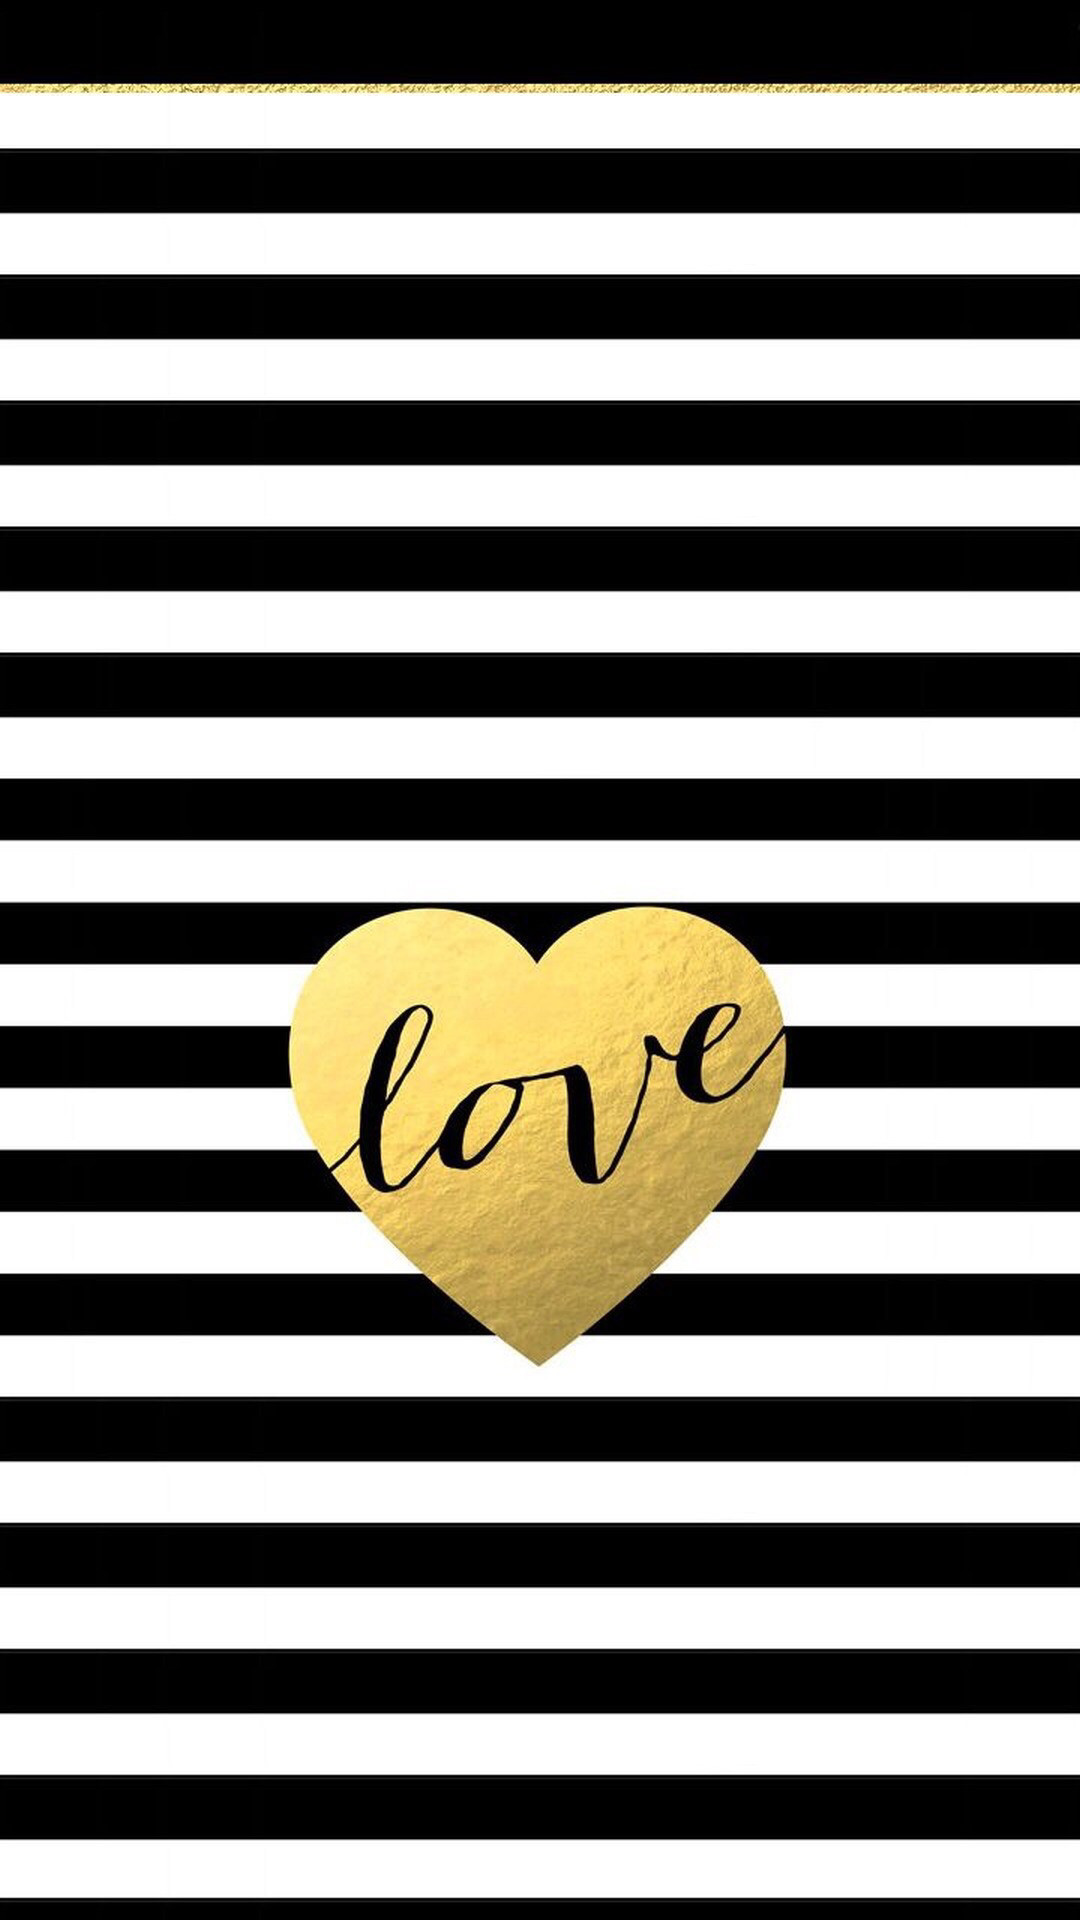 Black white stripes gold heart love iphone phone background wallpaper lock screen by